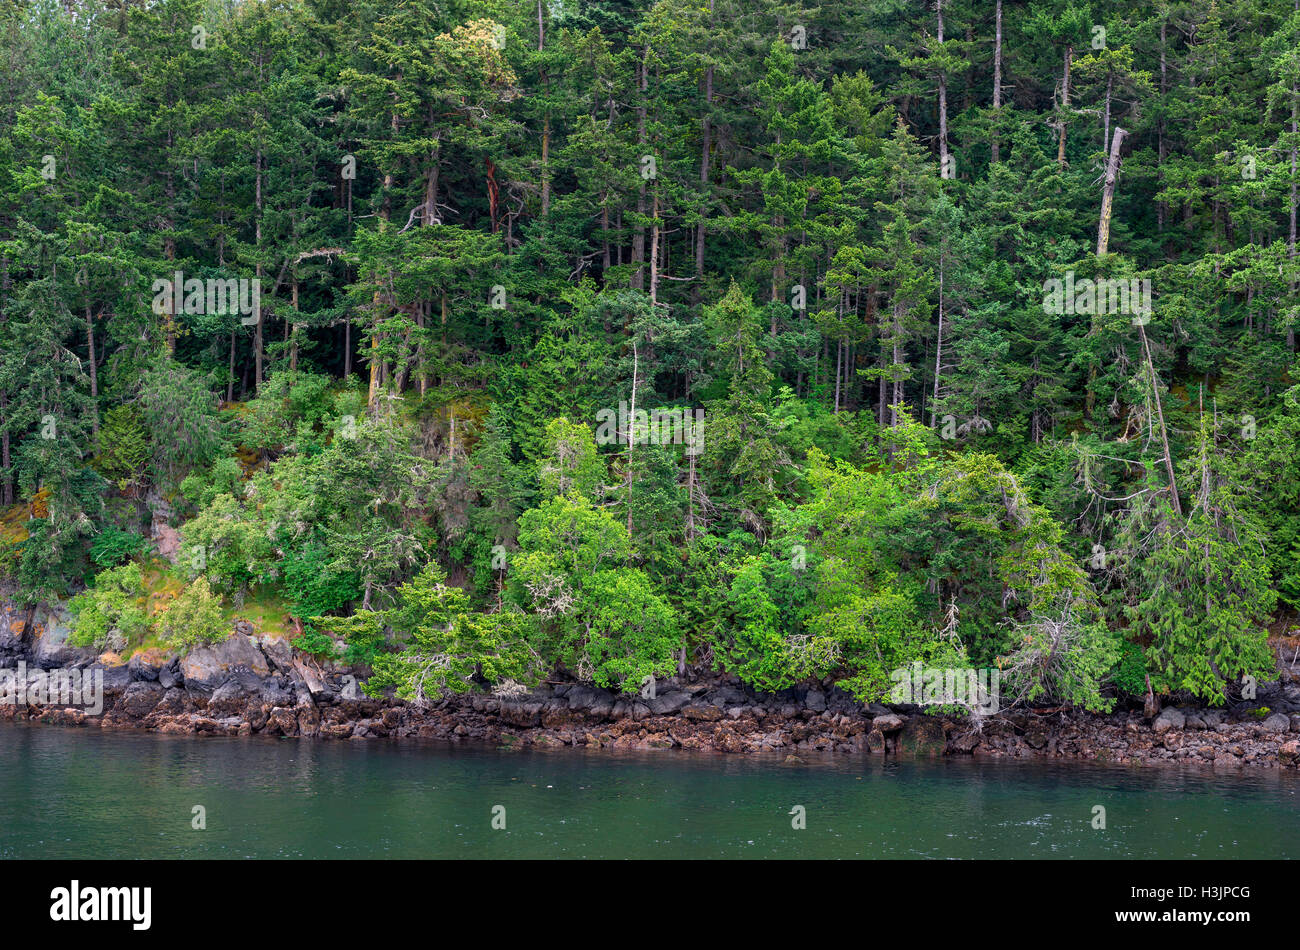 USA, Washington, San Juan Islands, Shaw Island, Forest of Douglas fir with scattered Pacific madrone trees above rocky shoreline Stock Photo